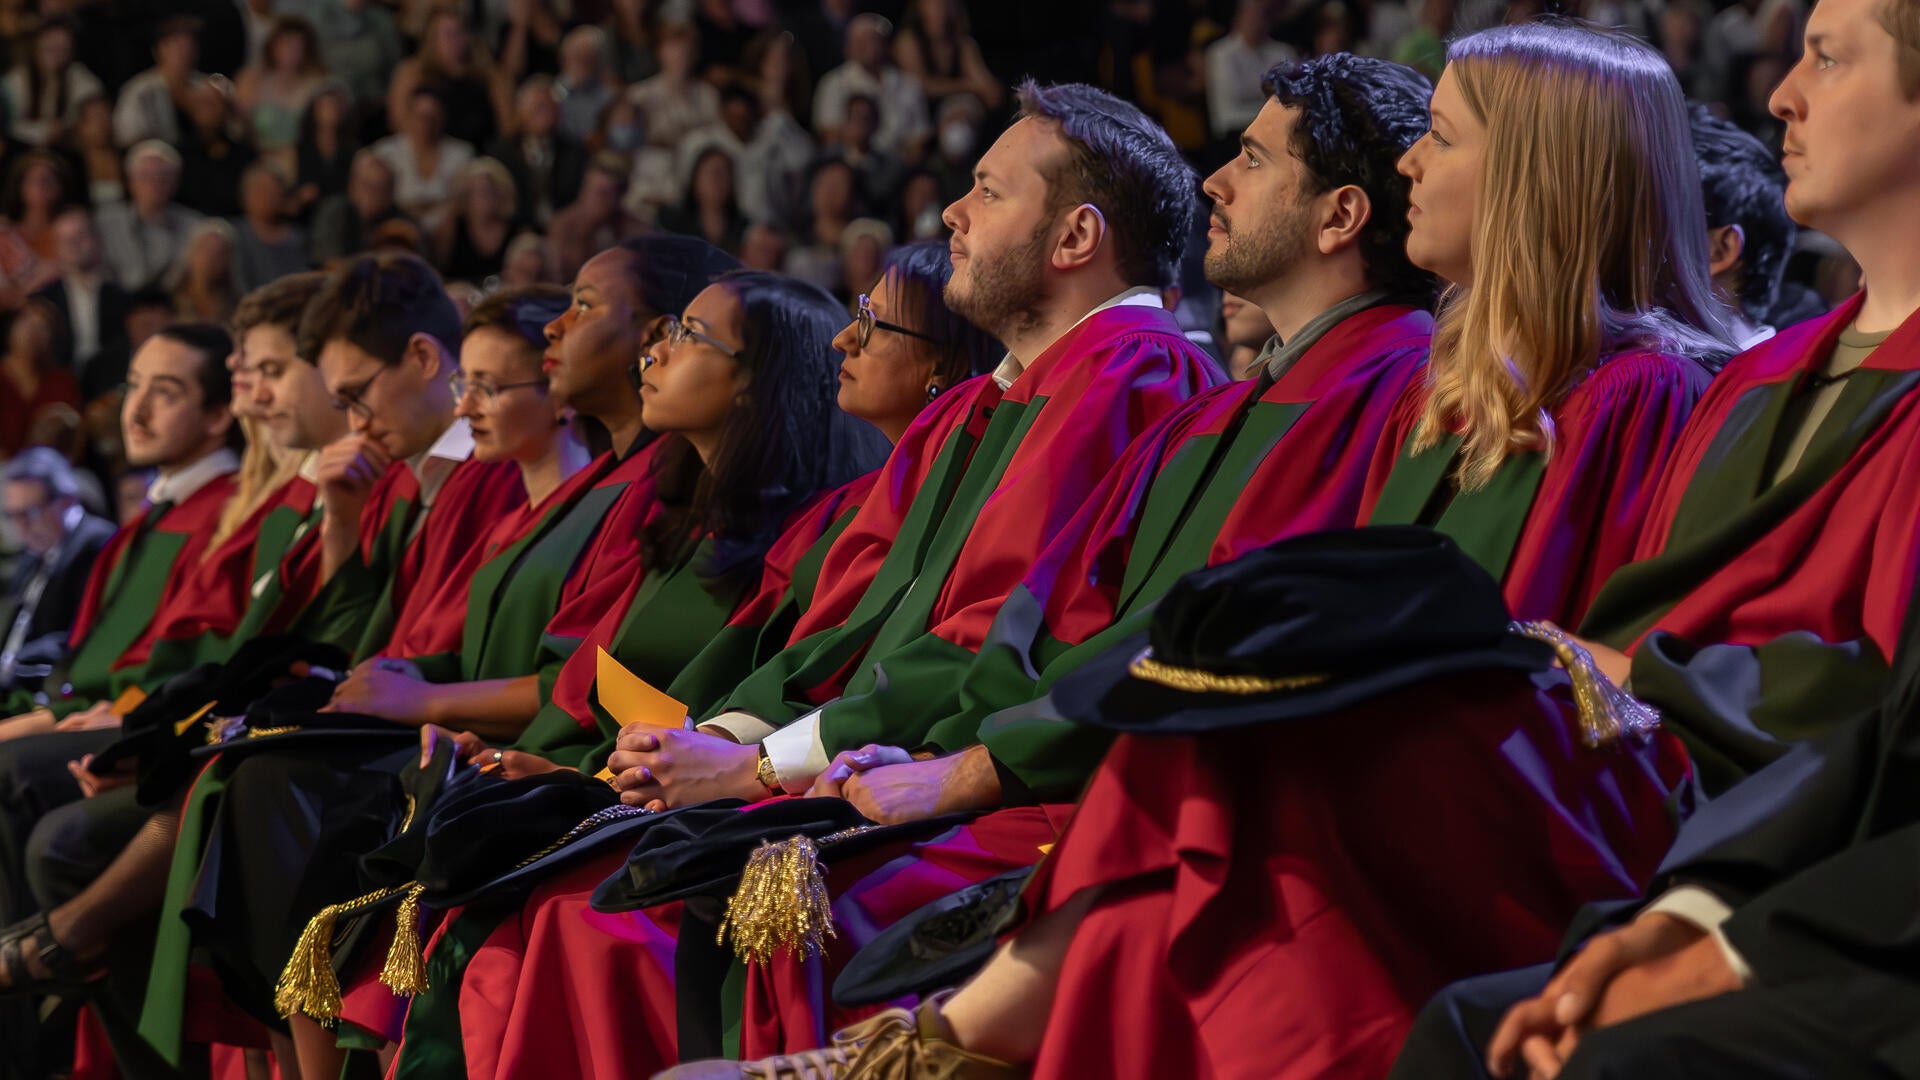 a profile shot of a dozen PhD graduates sitting together in caps and gowns for convocation